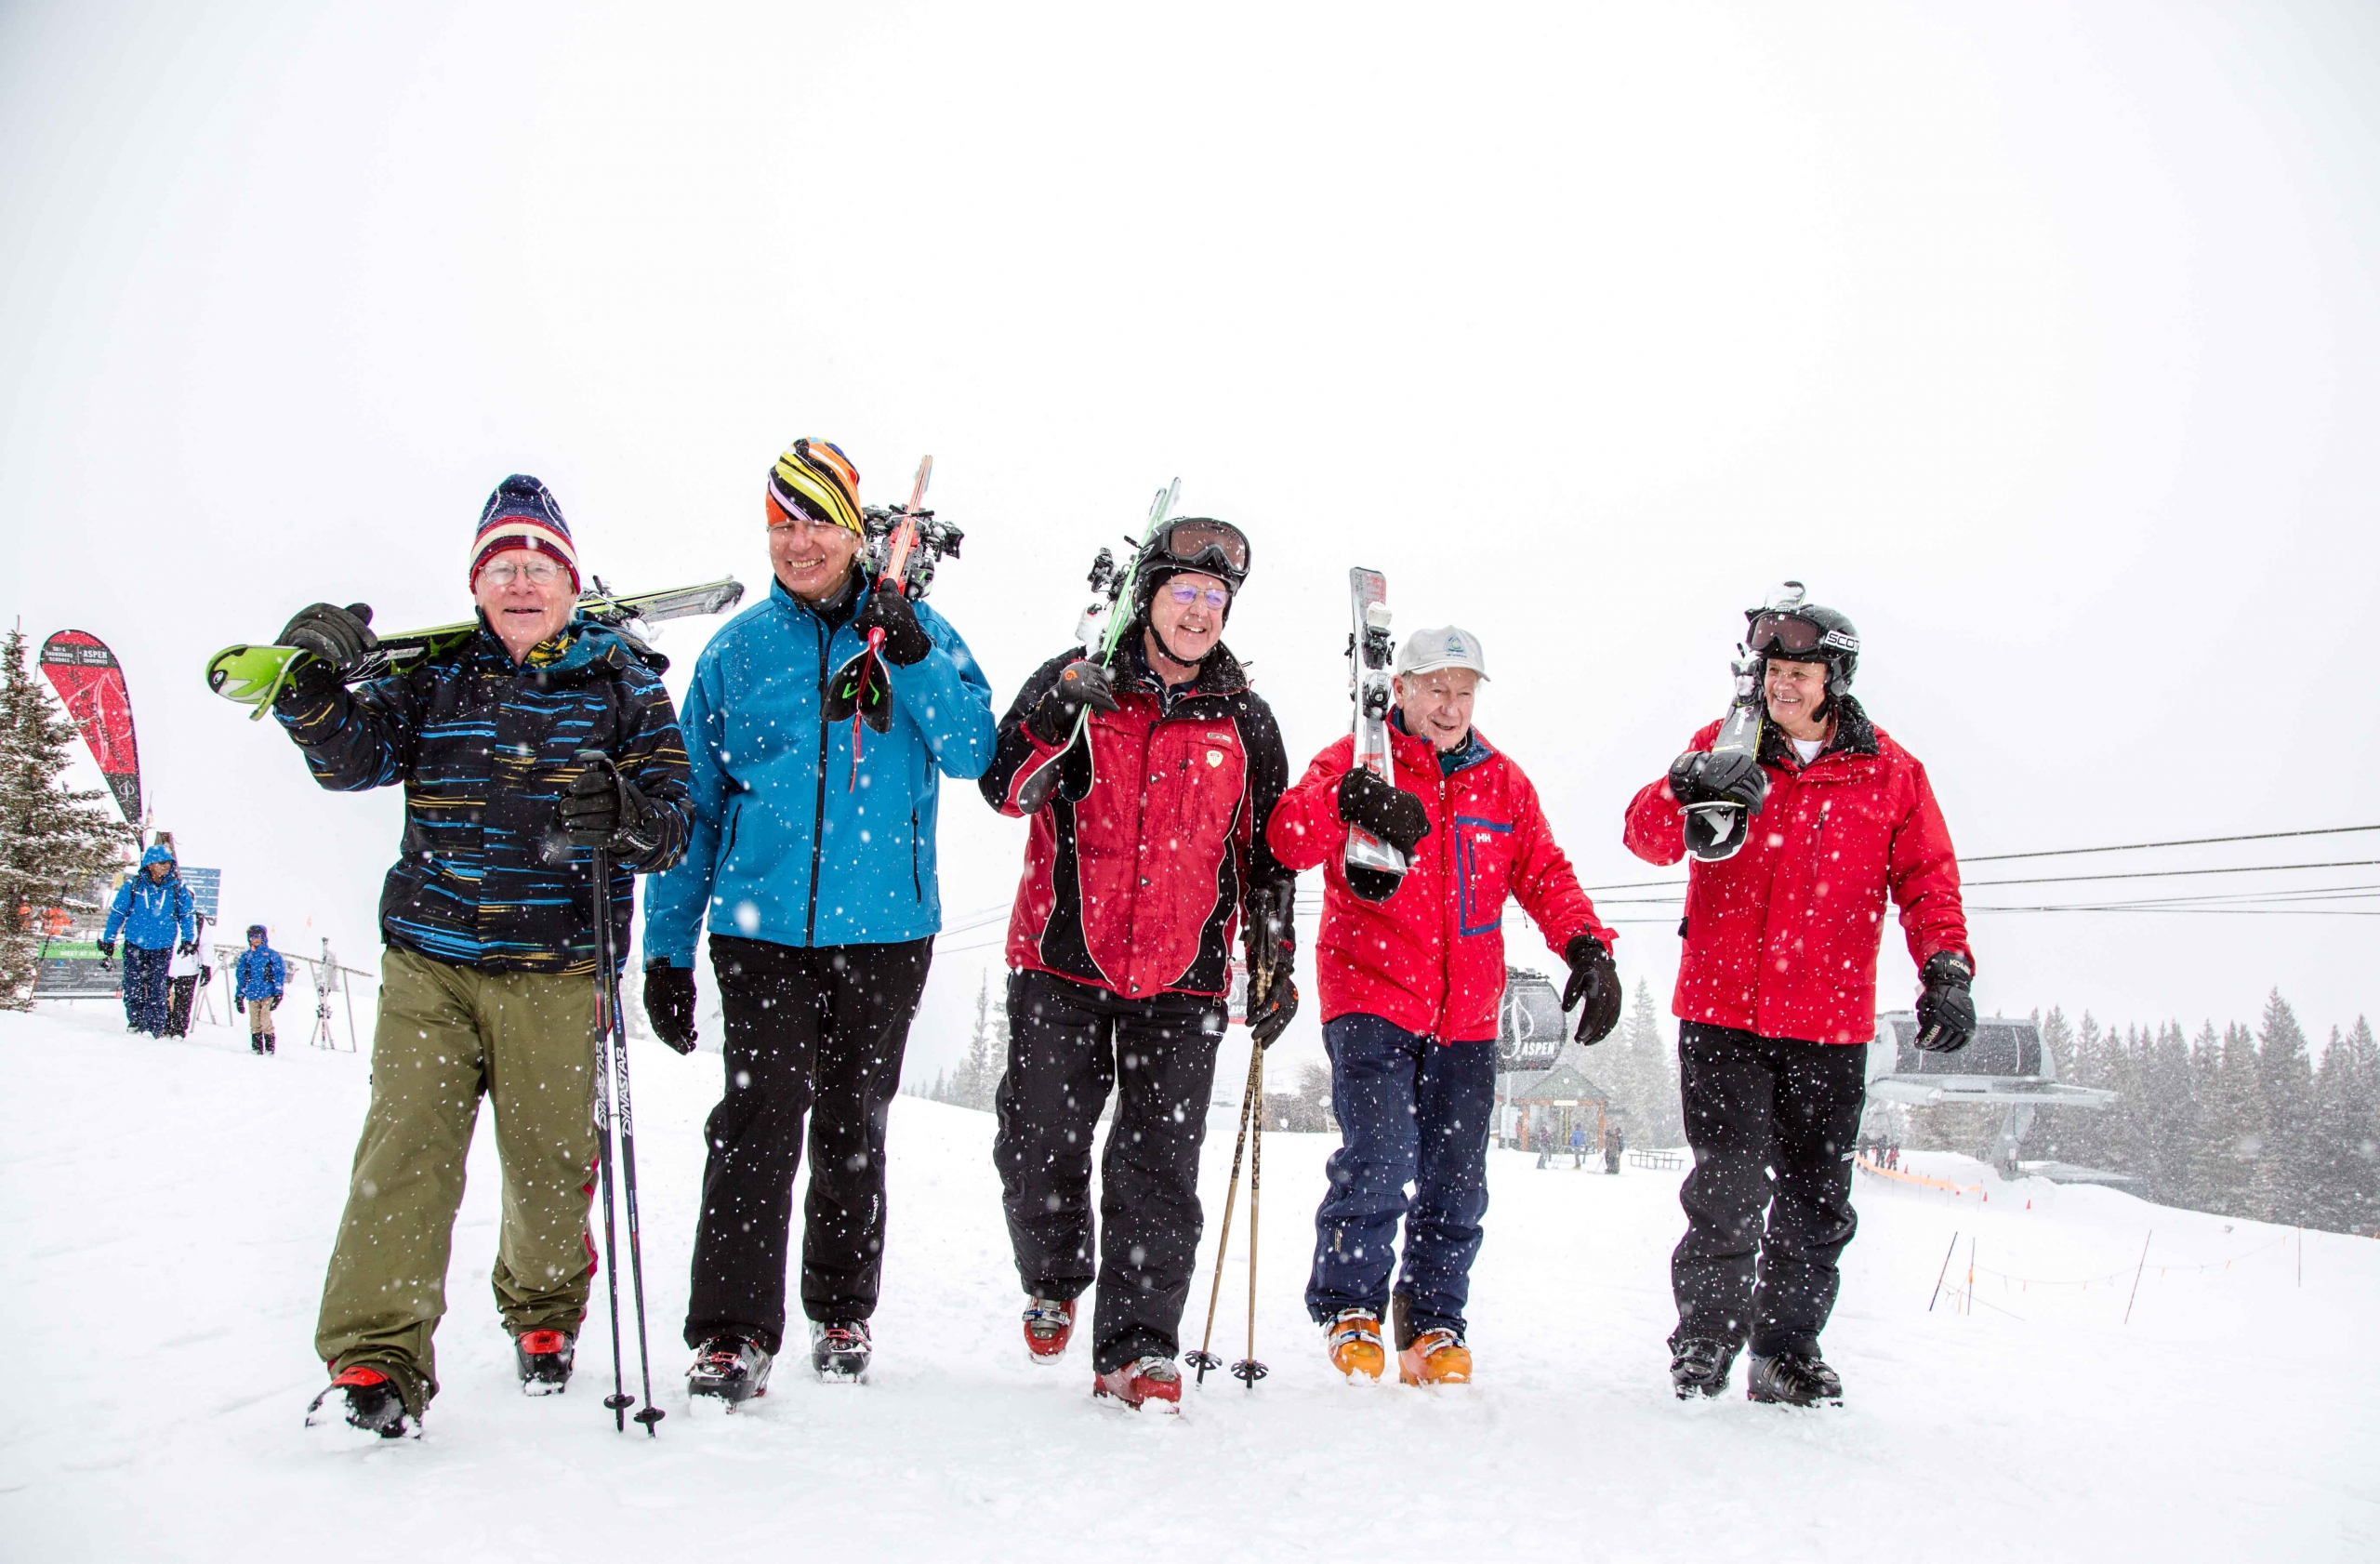 Five senior PSIA members walk from the gondola at Aspen Mountain carrying their skis over their shoulders